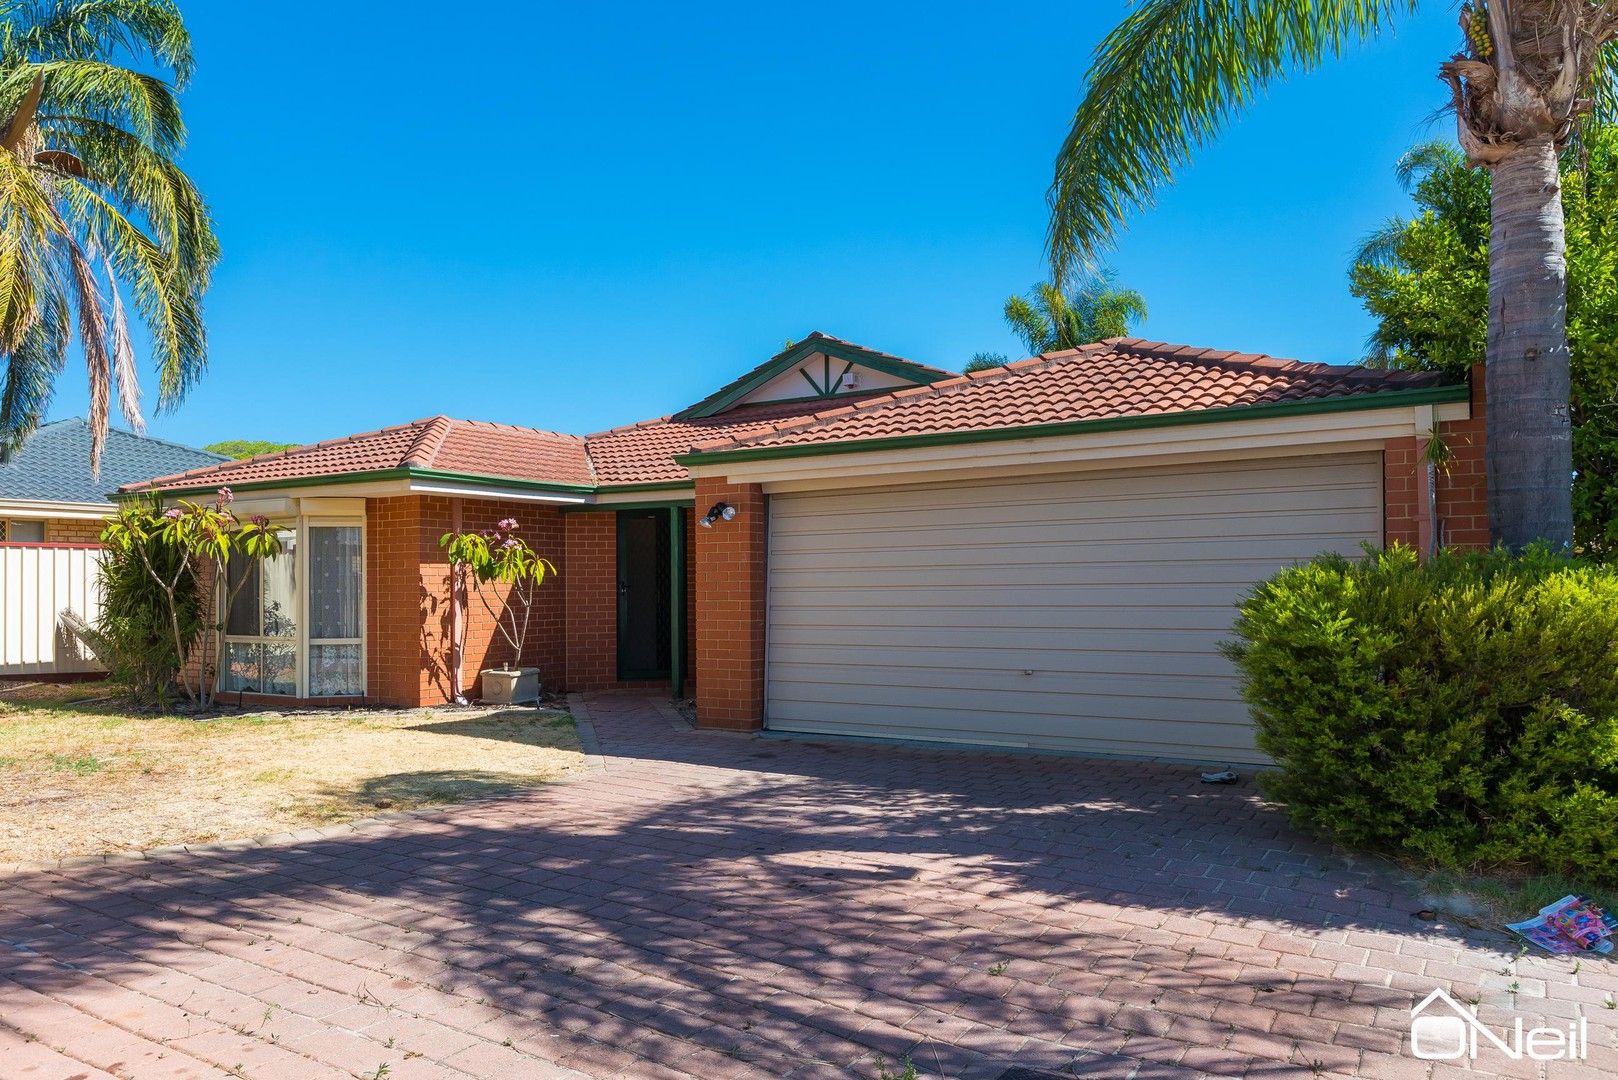 4 bedrooms House in 8 Rason Court SEVILLE GROVE WA, 6112